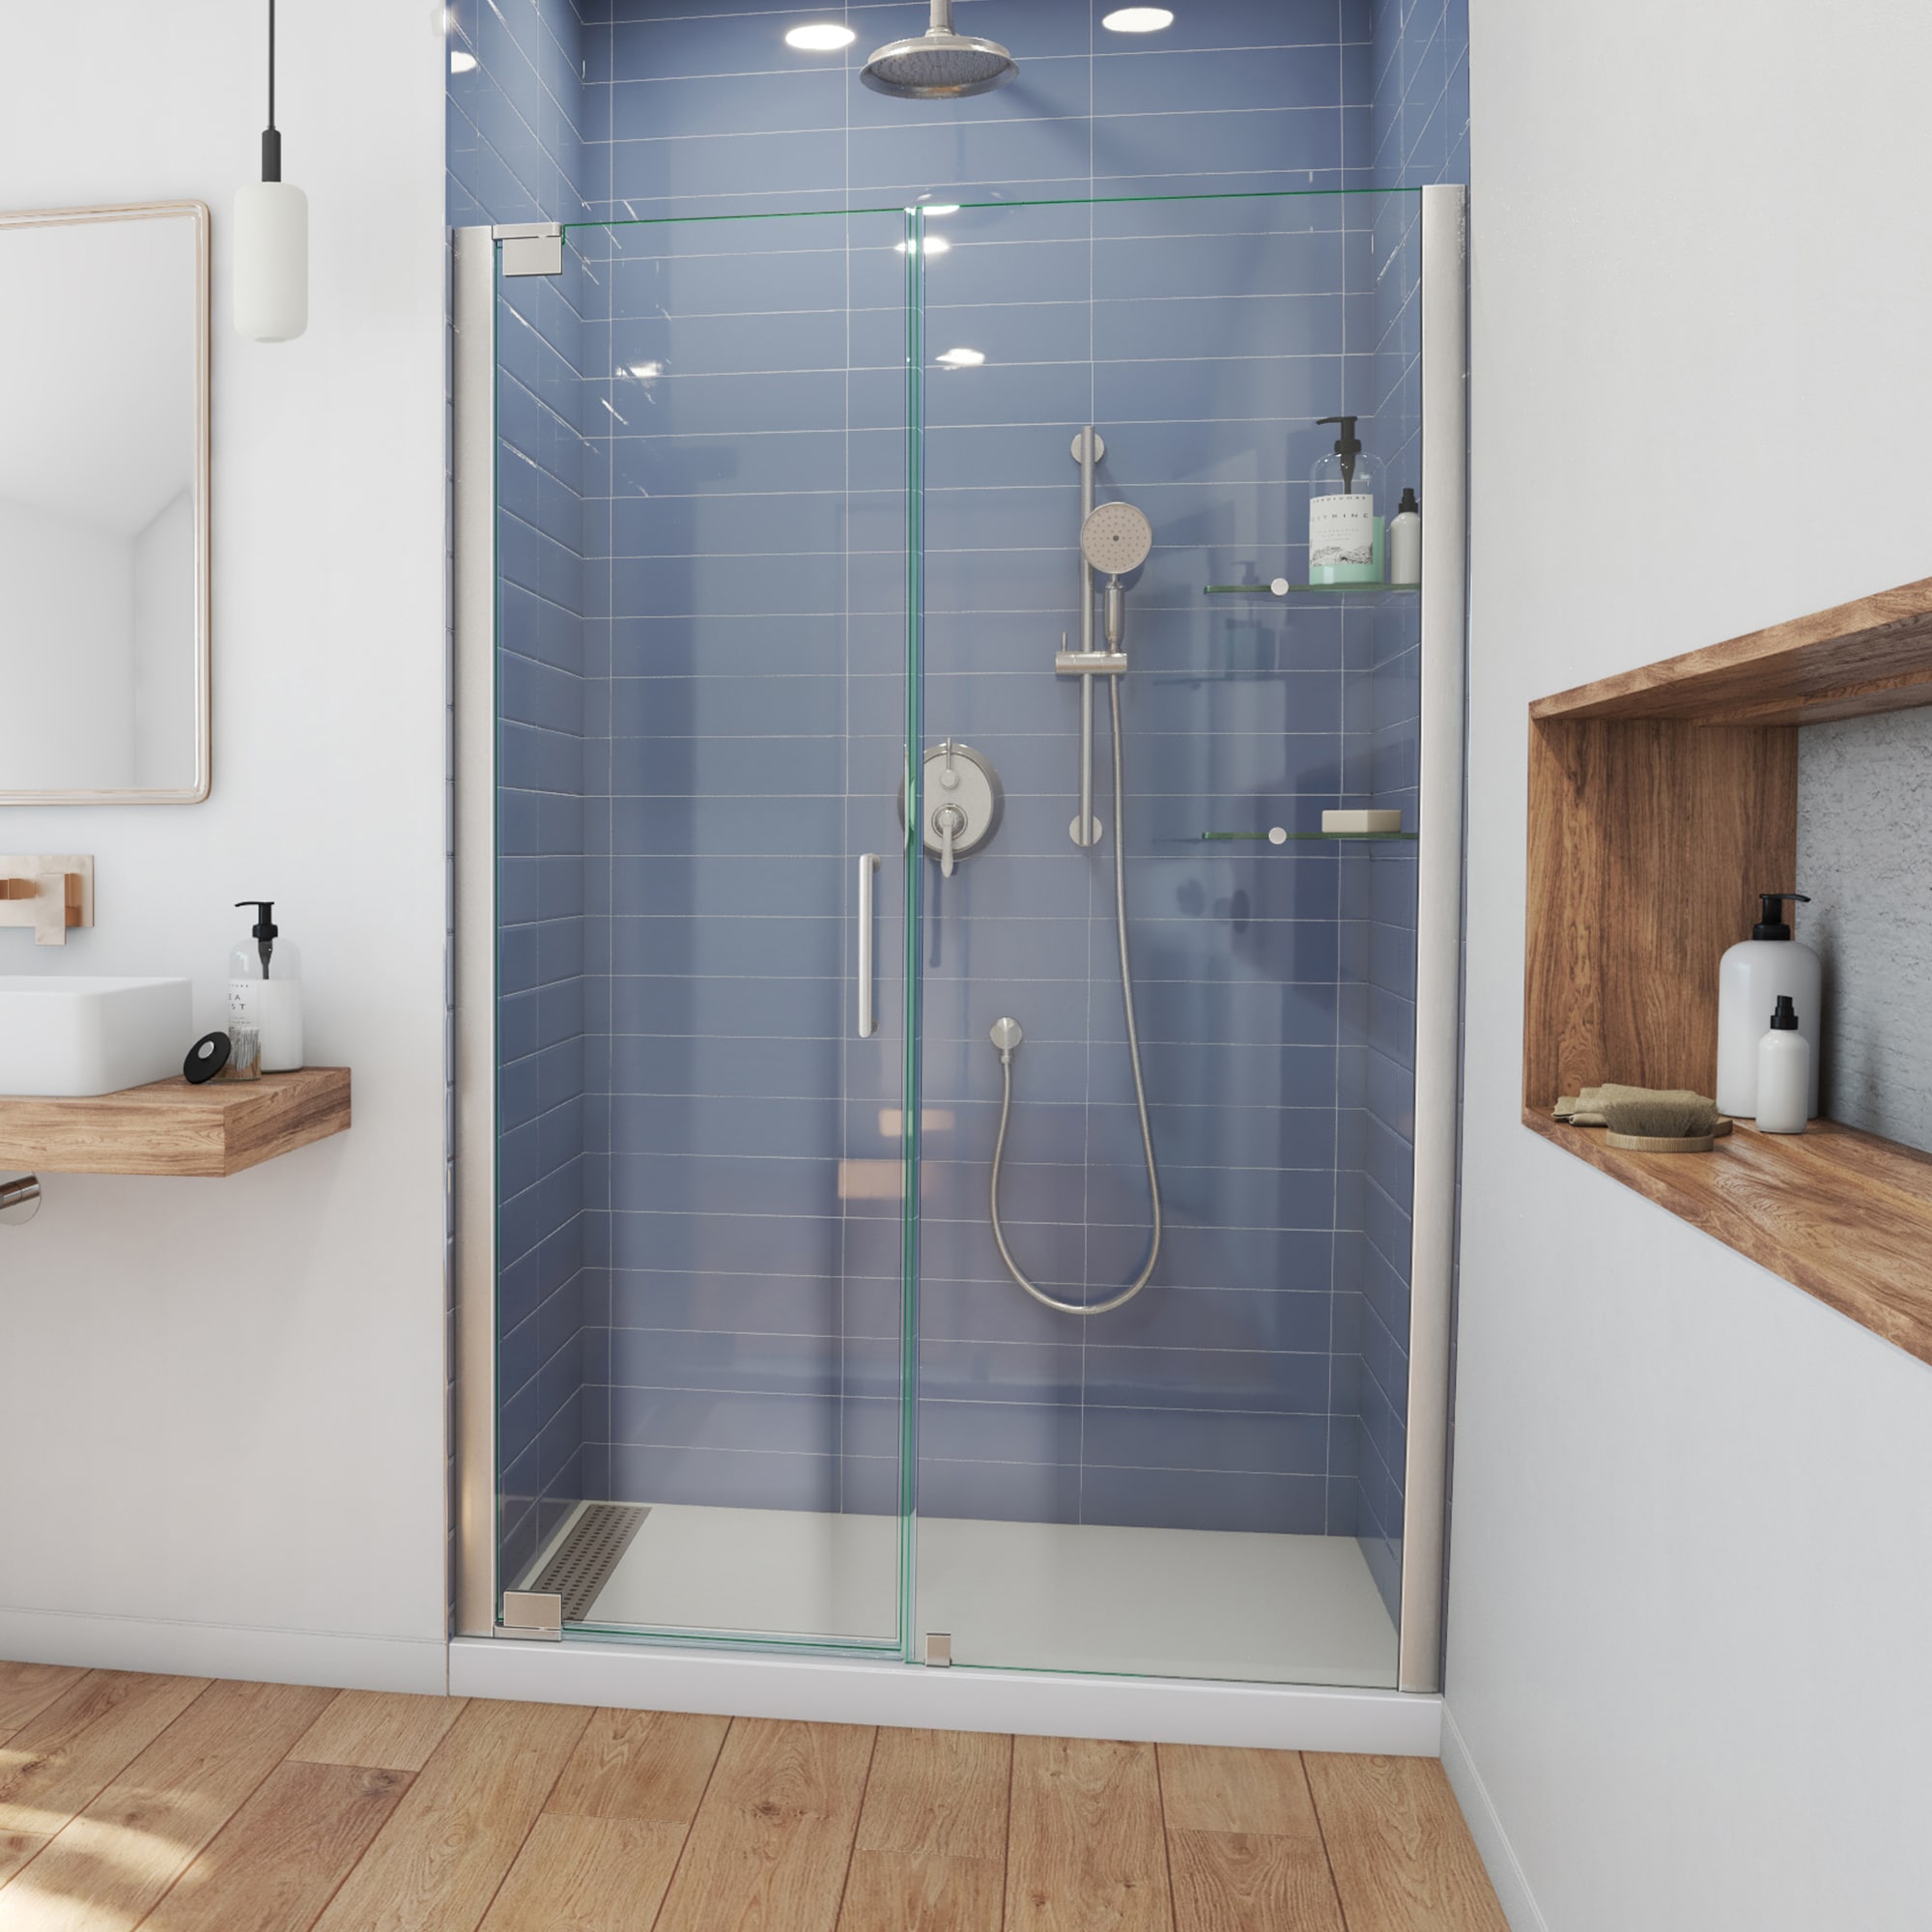 This angled shower caddy won't damage your rental's walls